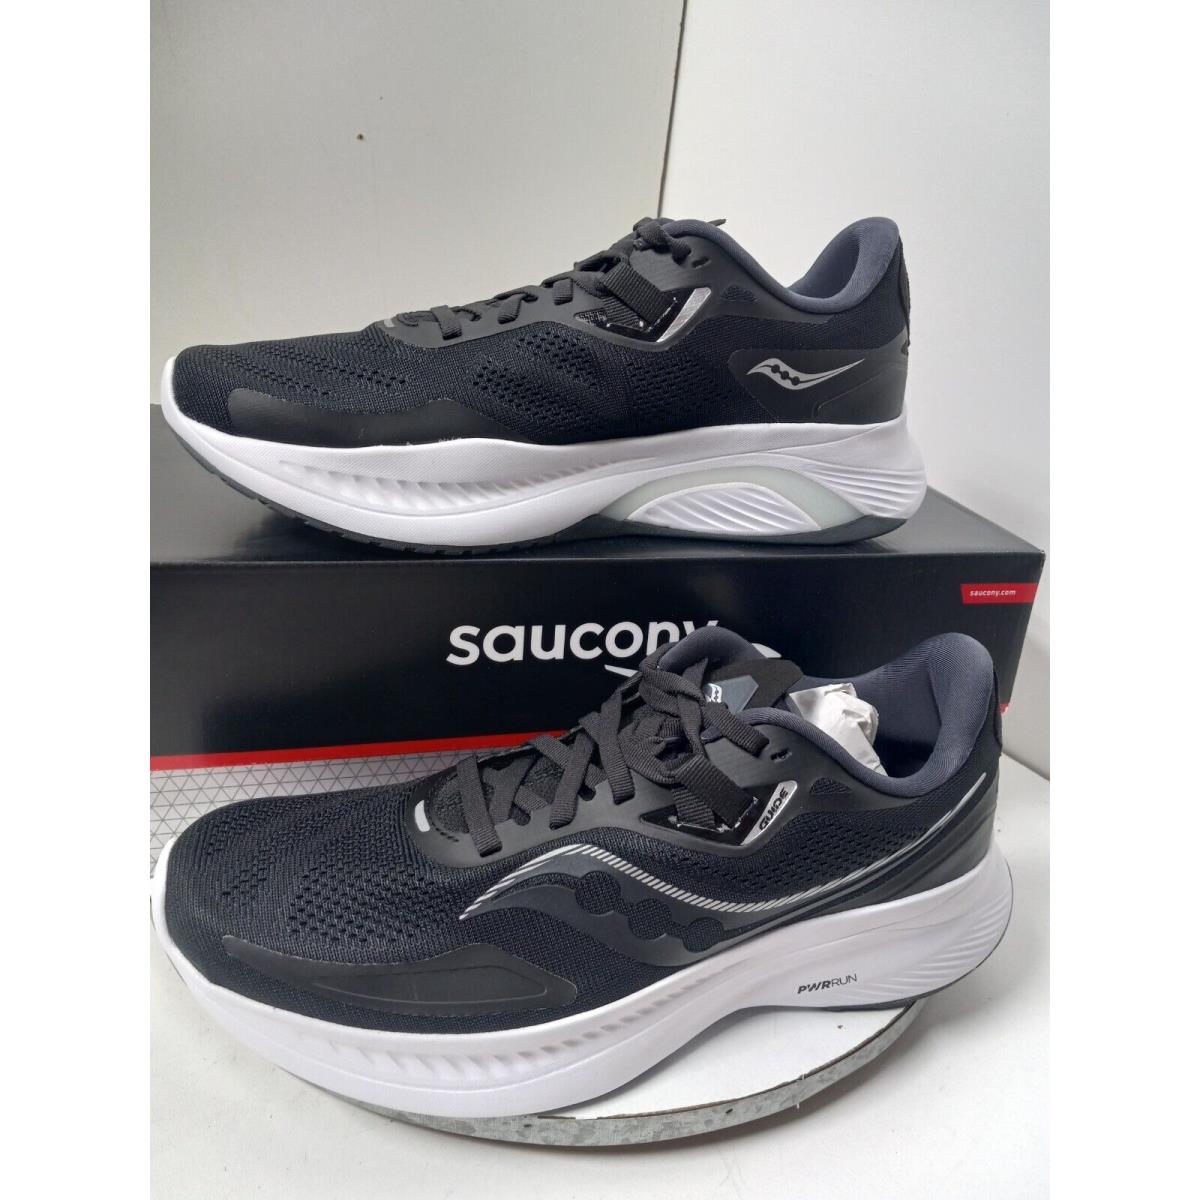 Saucony Sauncony Guide 15 Black White Running Shoes Mens Sz 9 Sneakers